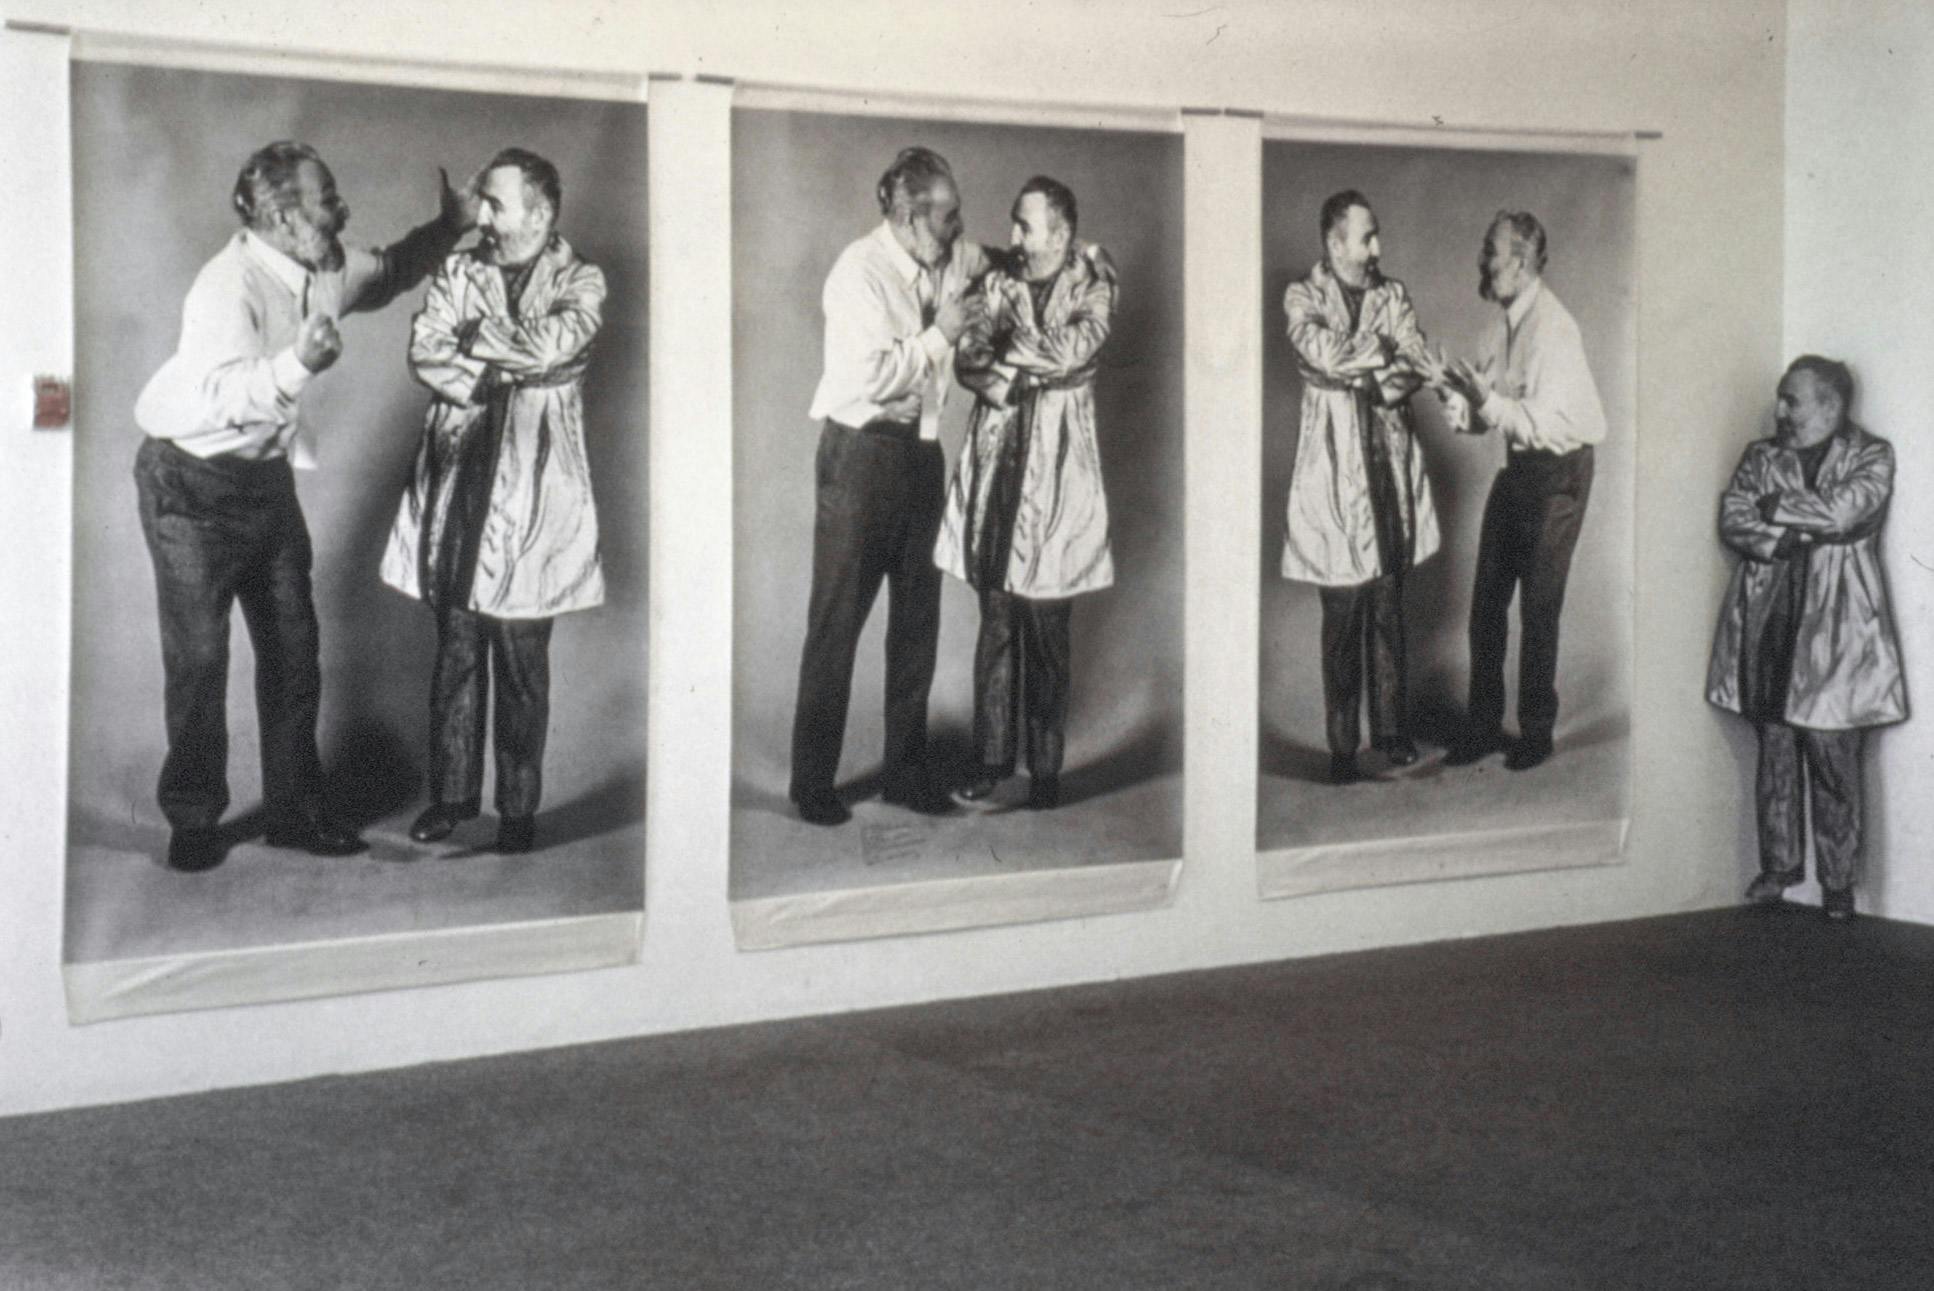 On a wall, there are 3 life-sized black and white photos of a person in business attire talking to a cardboard cutout of themself. The cardboard cutout is placed in the corner beside the photos. 